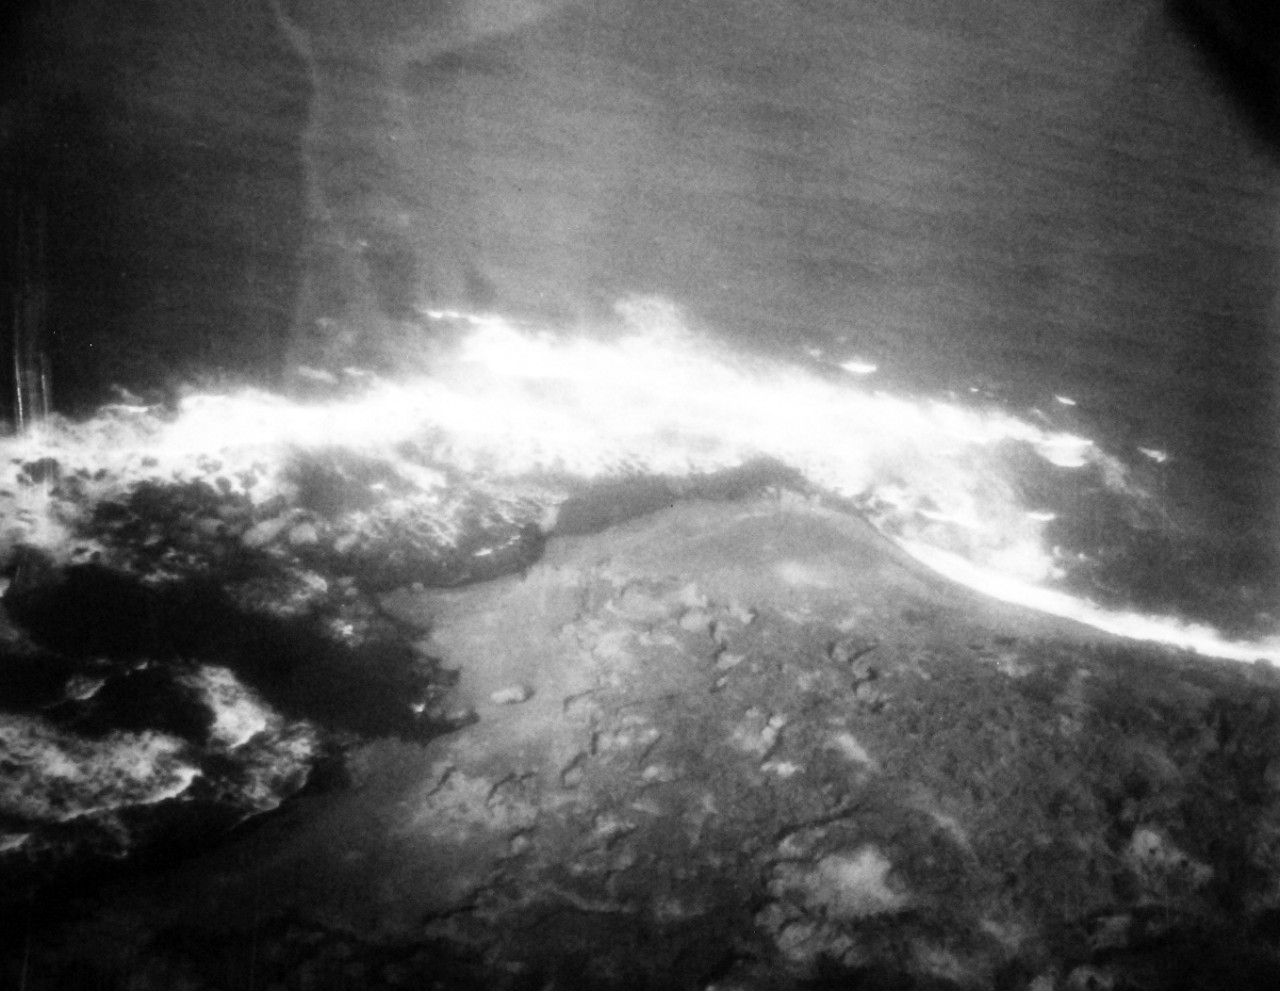 80-G-339199:  Battle for Iwo Jima, February-March 1945.  Bomb damage to Iwo Jima from Composite Squadron Ninety-Two (VC-92).  Image taken by Photographer’s Mate E.W. Peck from USS Tulagi (CVE-72).  Official U.S. Navy Photograph, now in the collections of the National Archives.  (2013/08/14).  